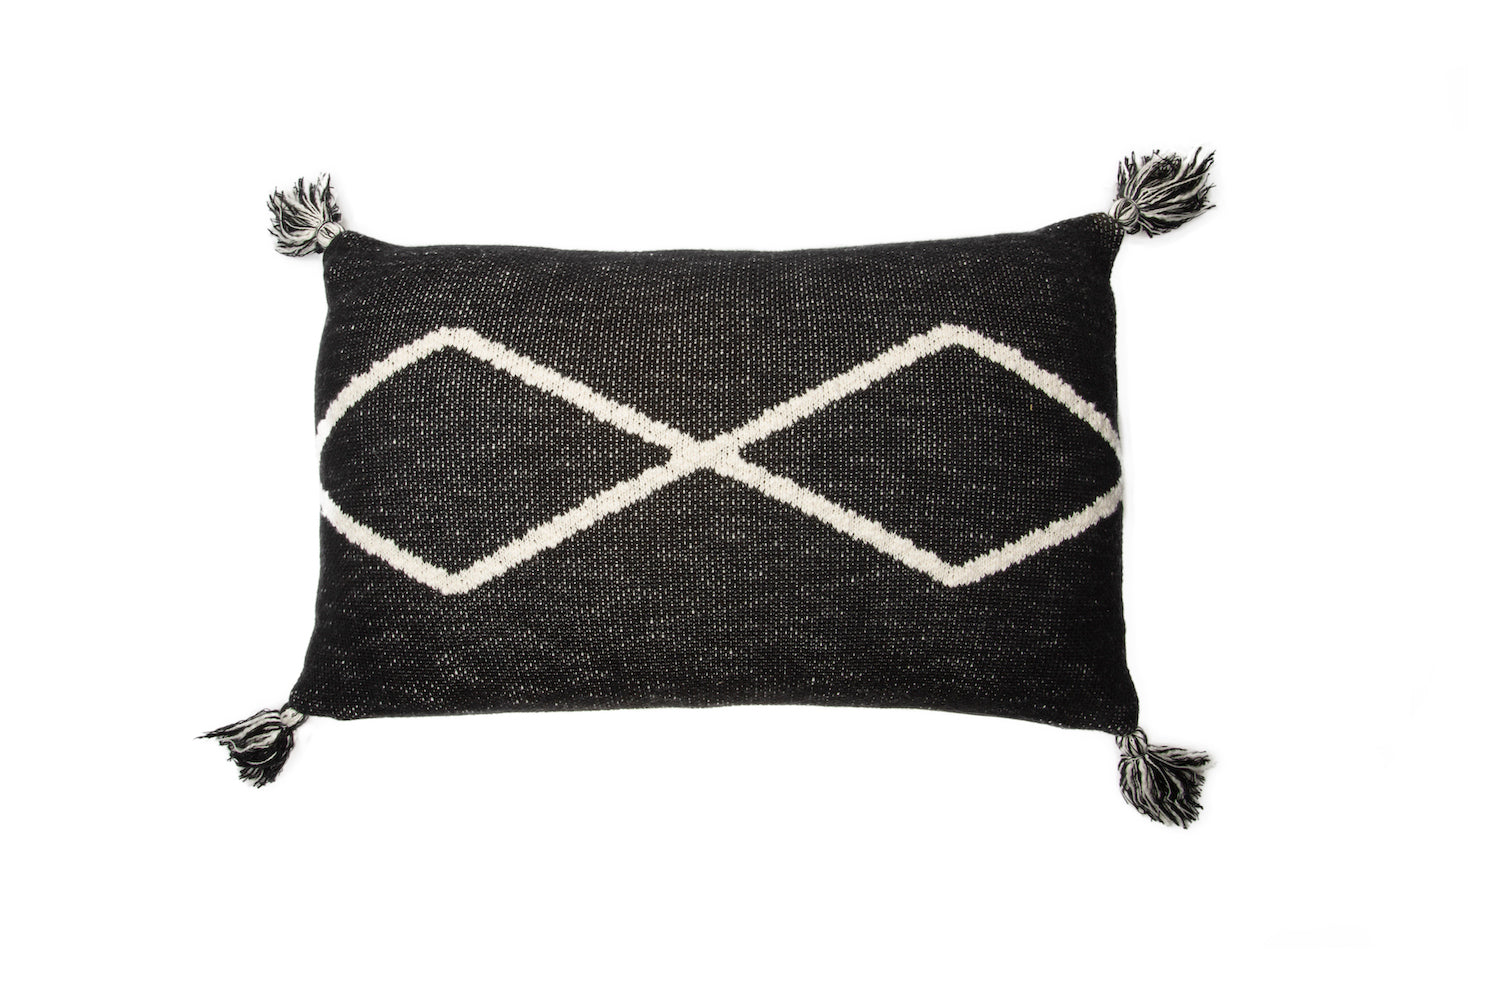 A soft knitted cushion in Black with rhombus pattern in natural and small corner tassels. 